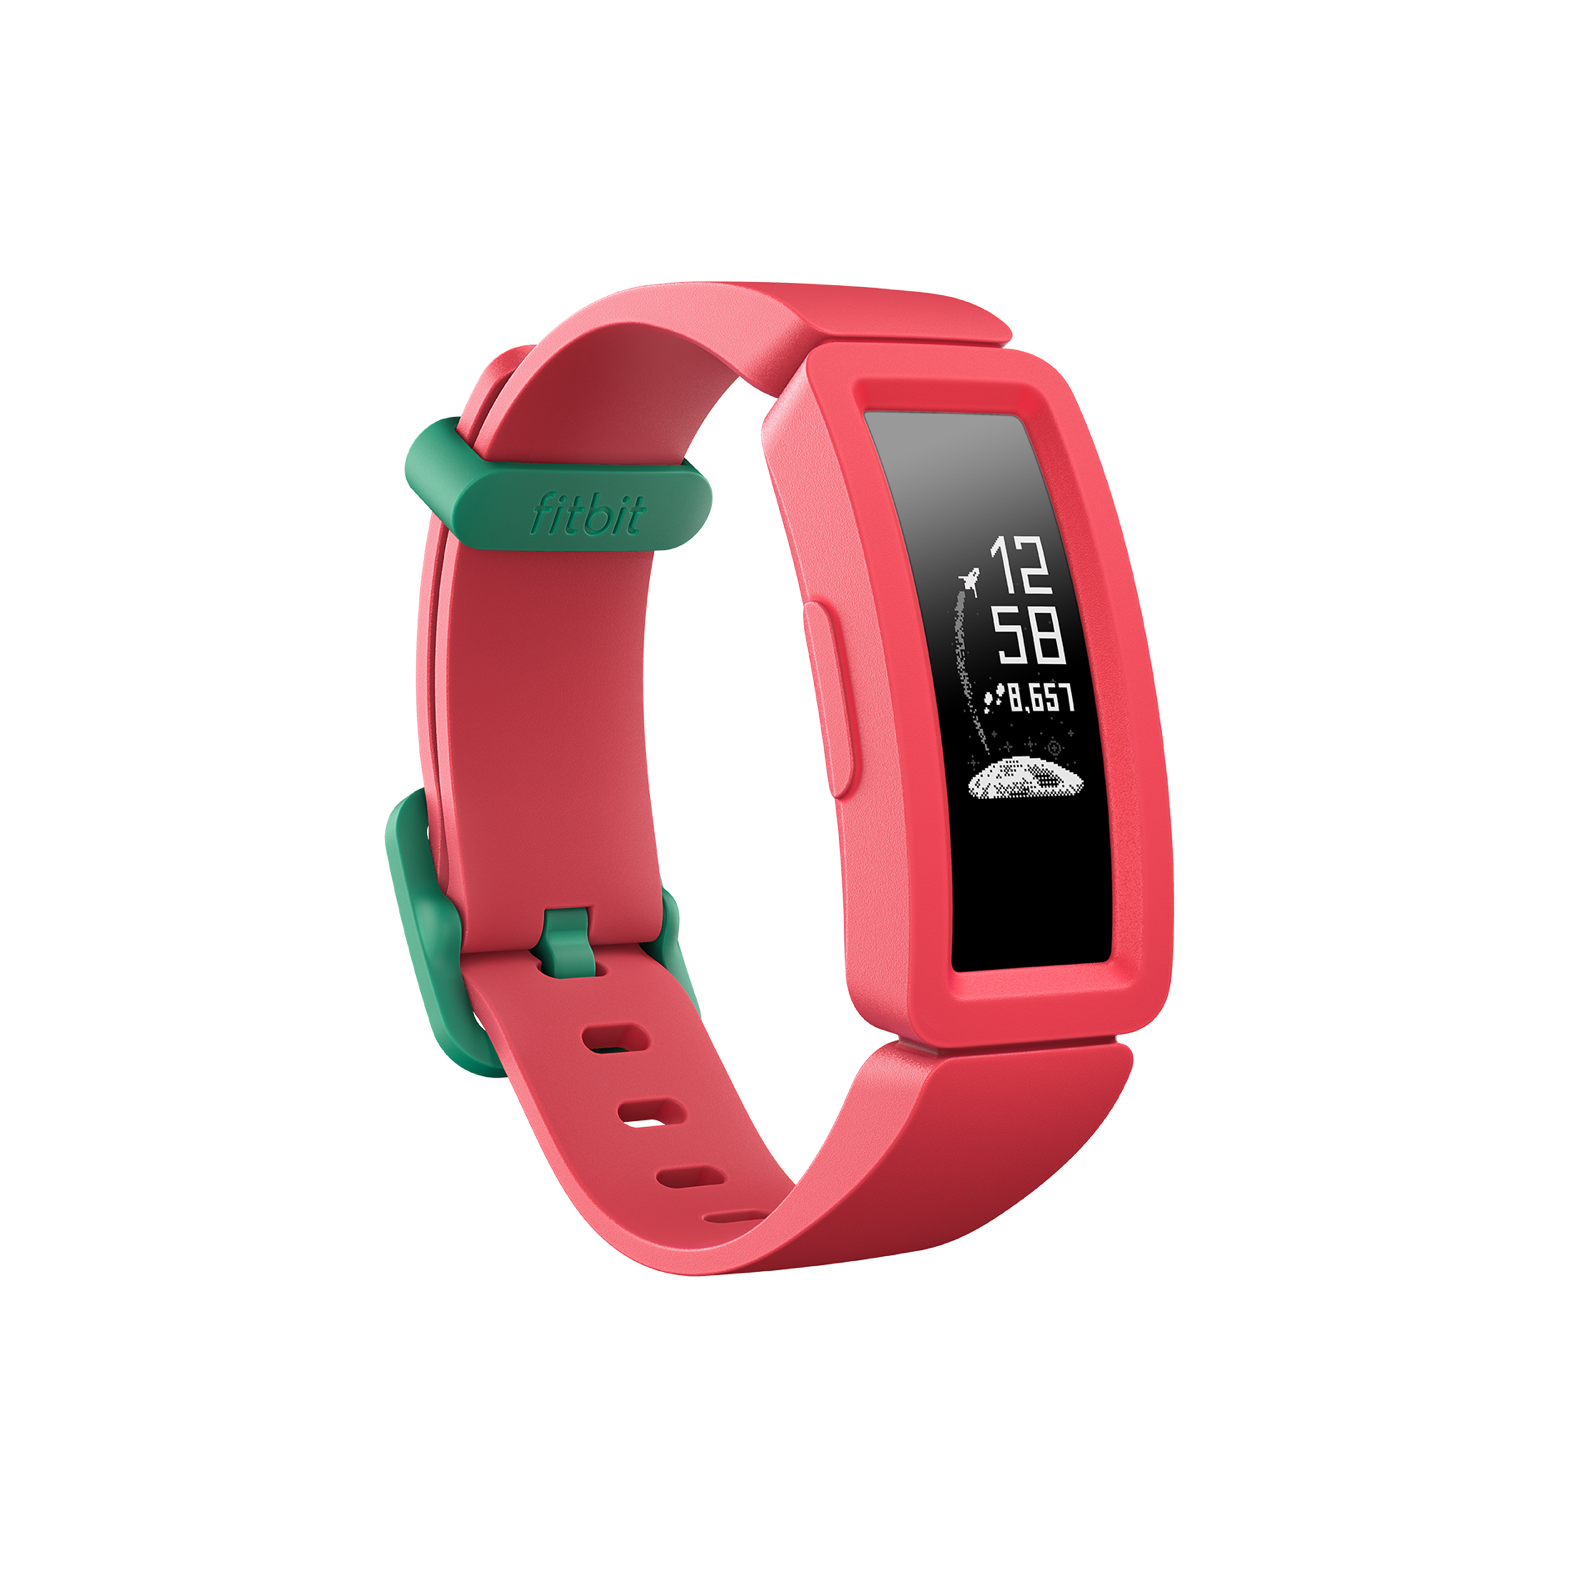 fitbit charge 3 pris